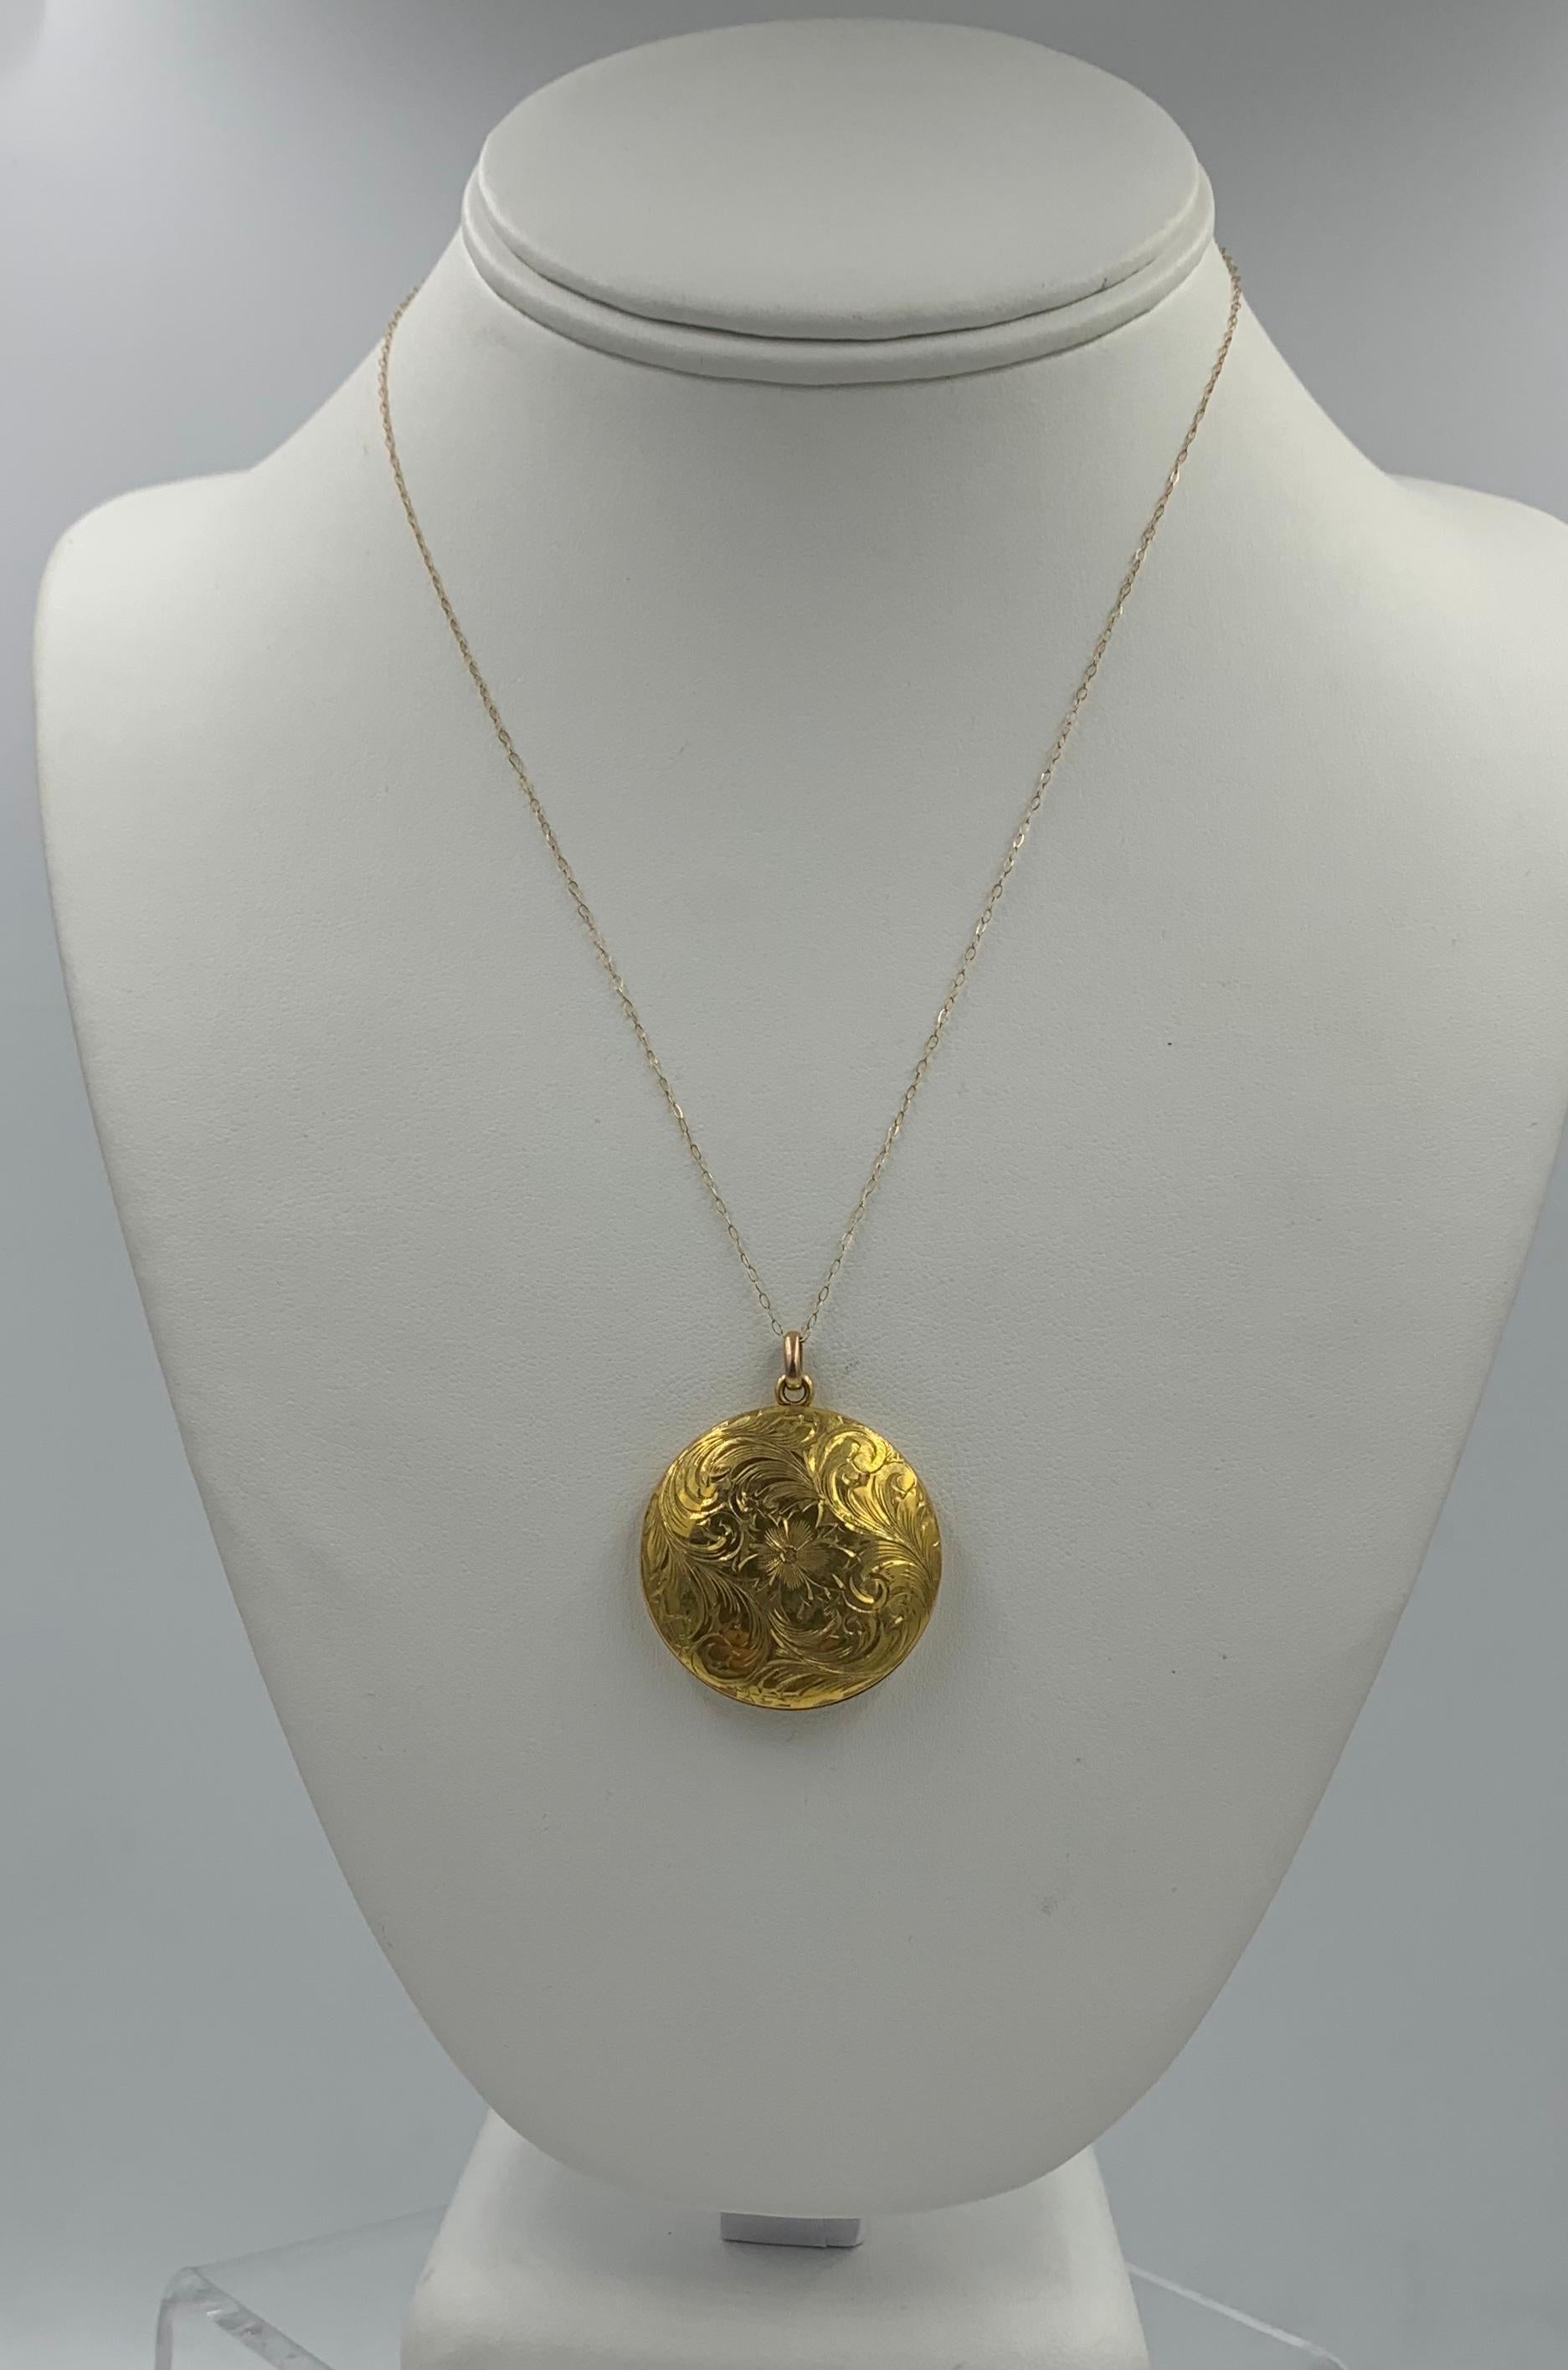 Antique Victorian Gold Locket Pendant Flower Motif Engraved Monogram In Excellent Condition For Sale In New York, NY